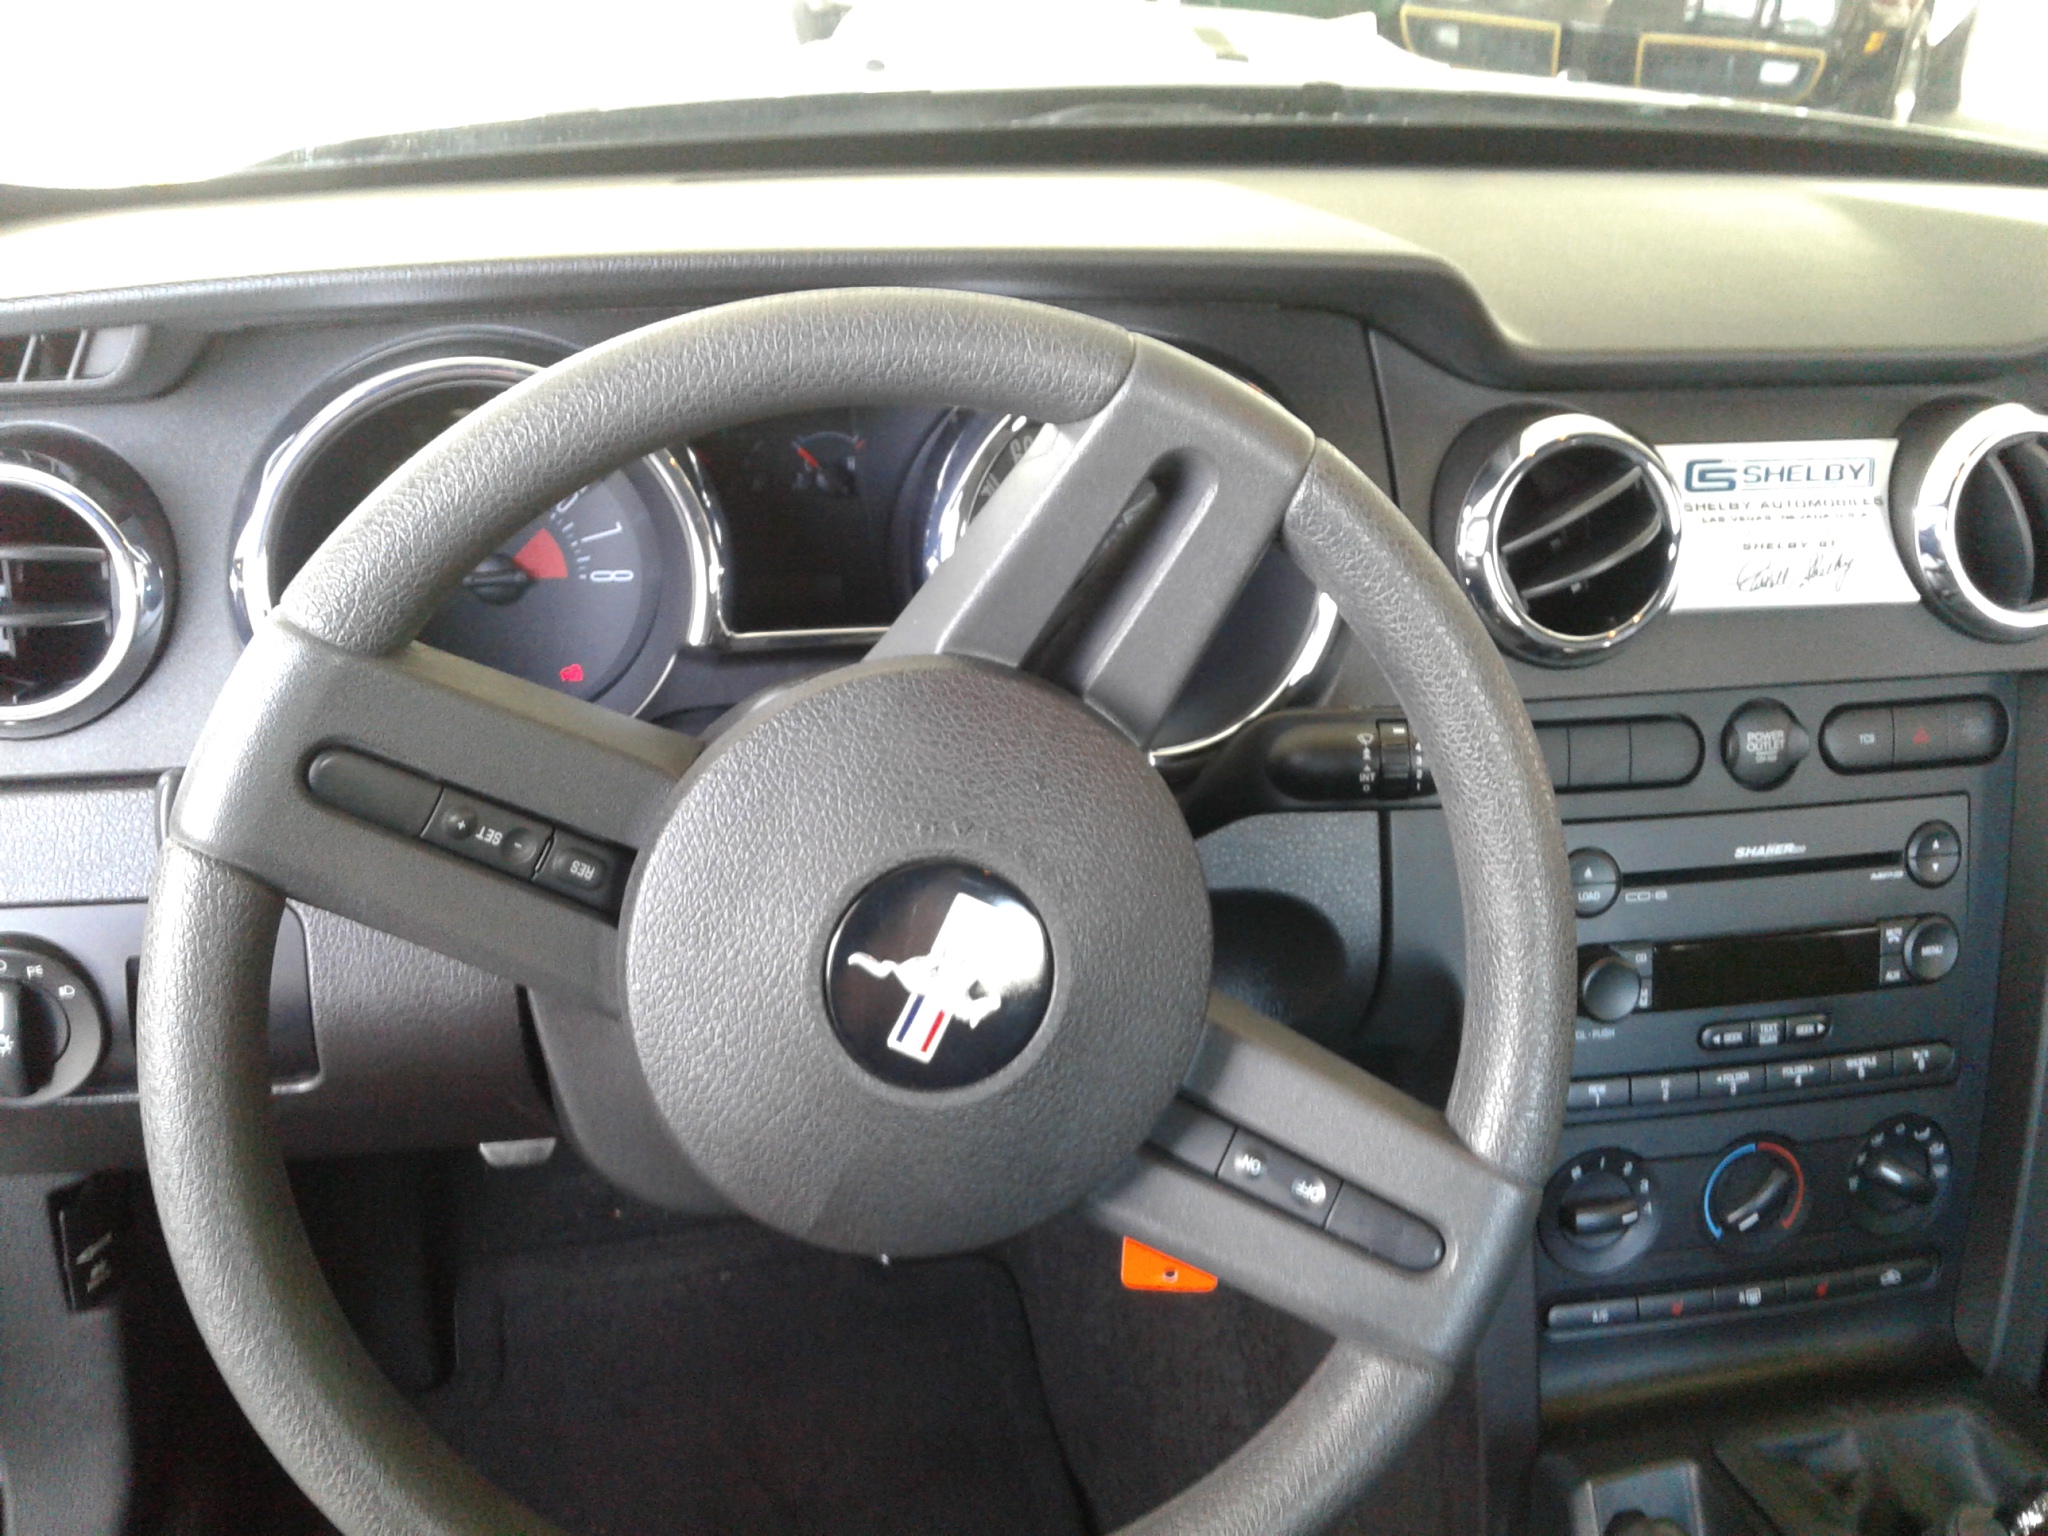 3rd Image of a 2007 FORD MUSTANG GT